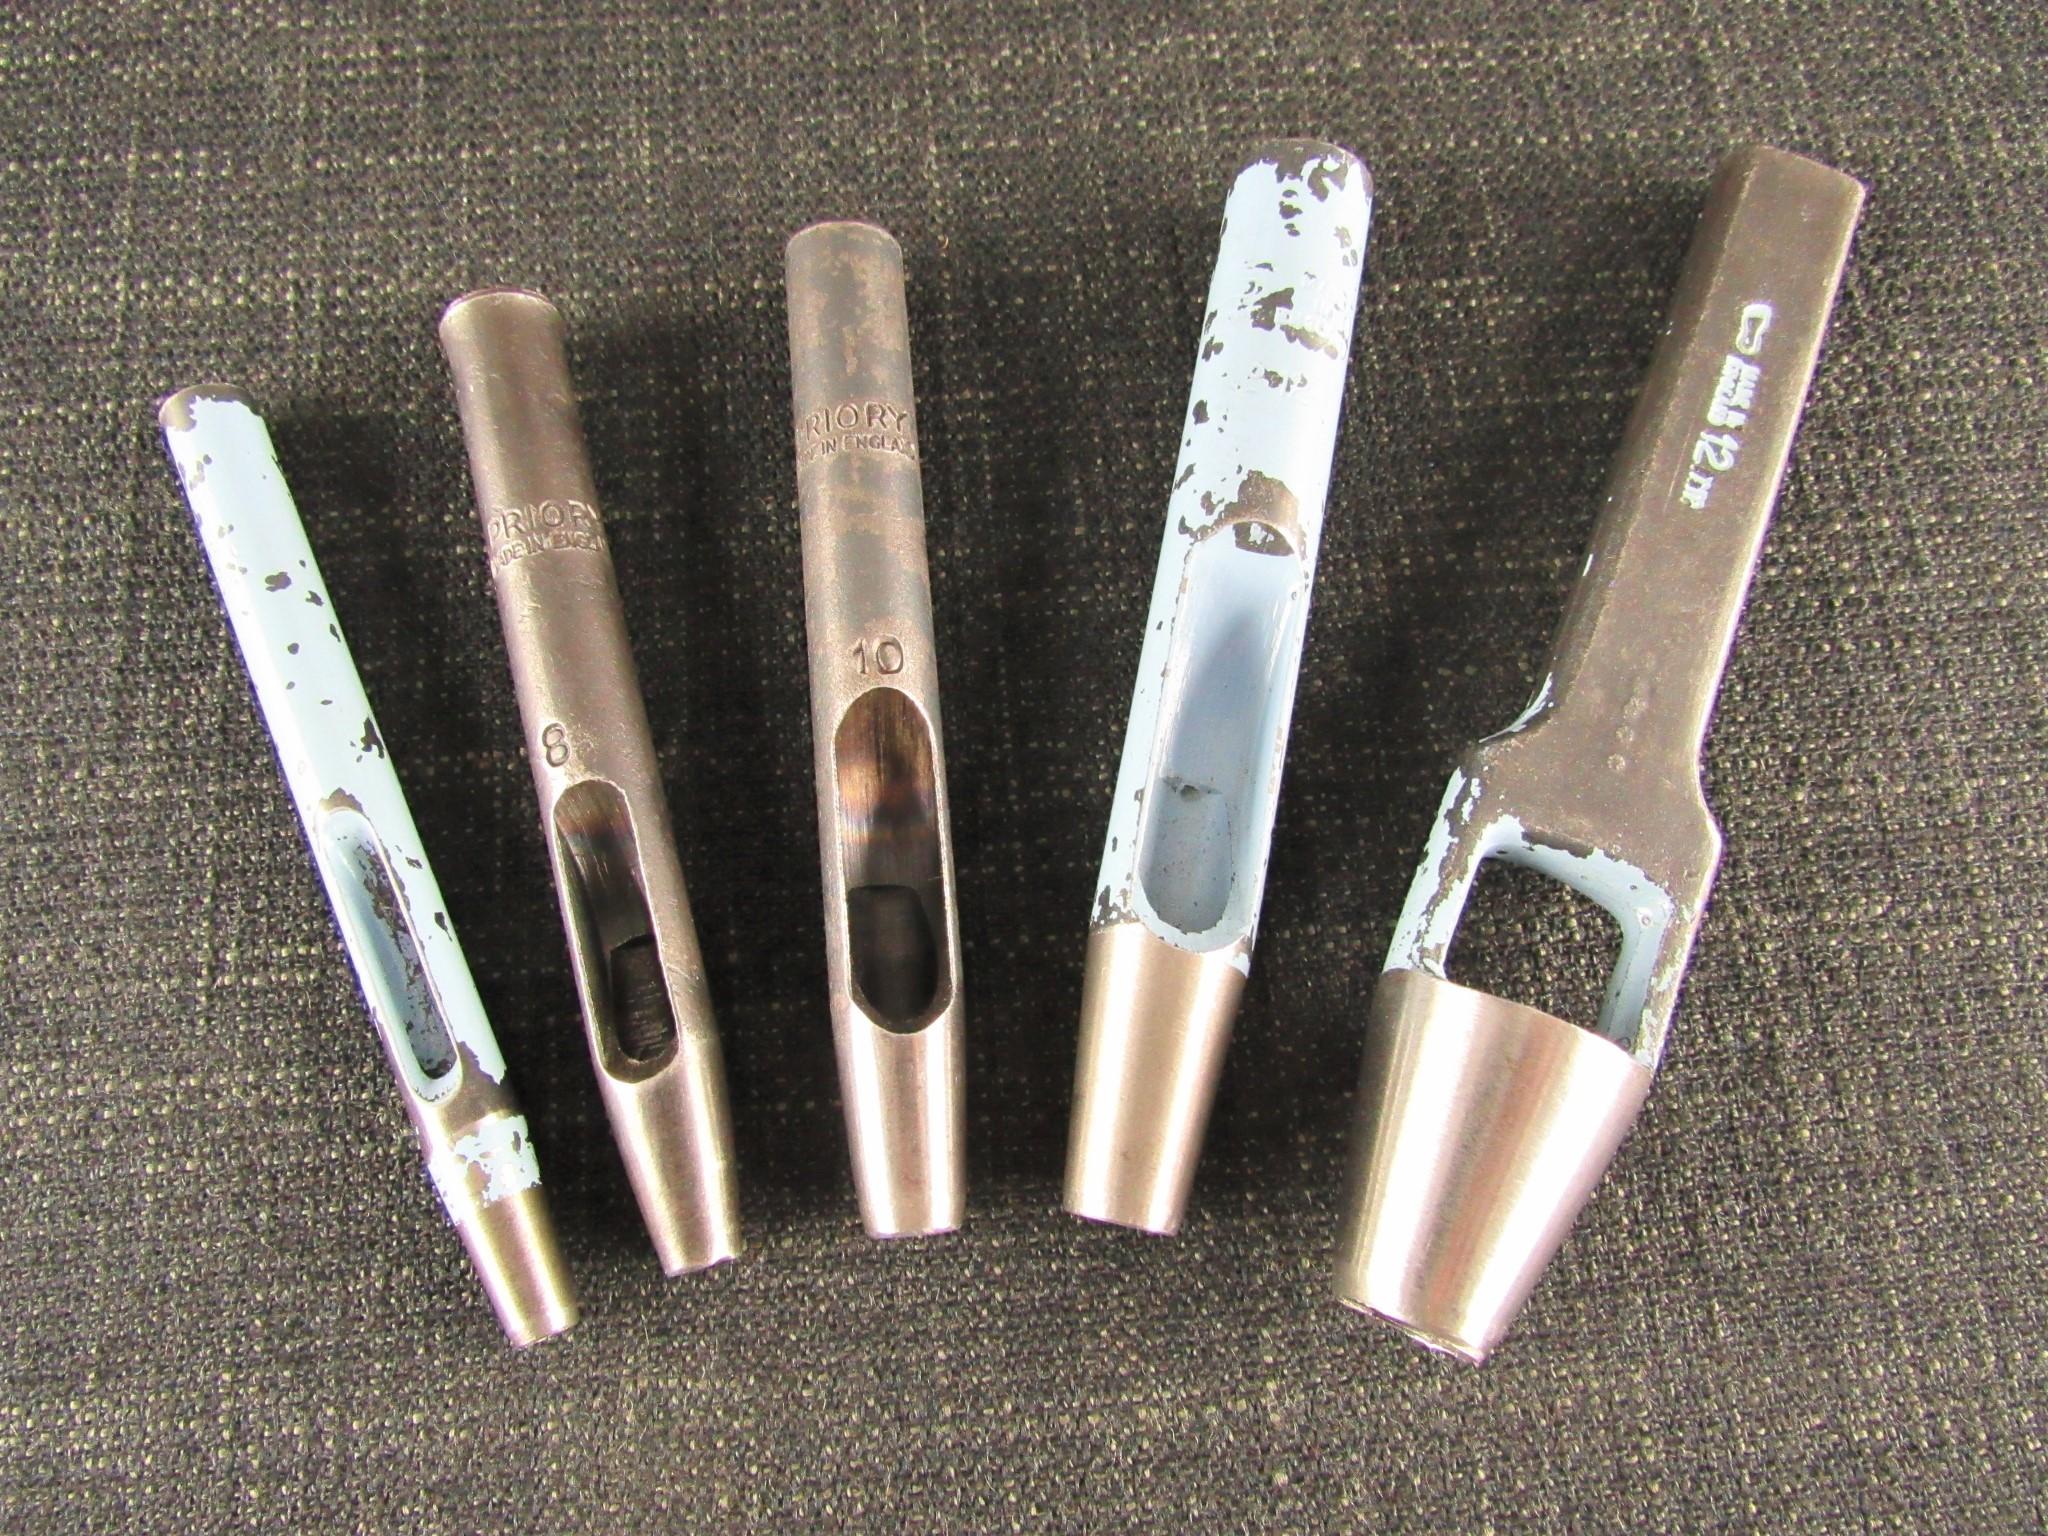 Graduated Group of 5 Wad Punches - Saddler Round Punches